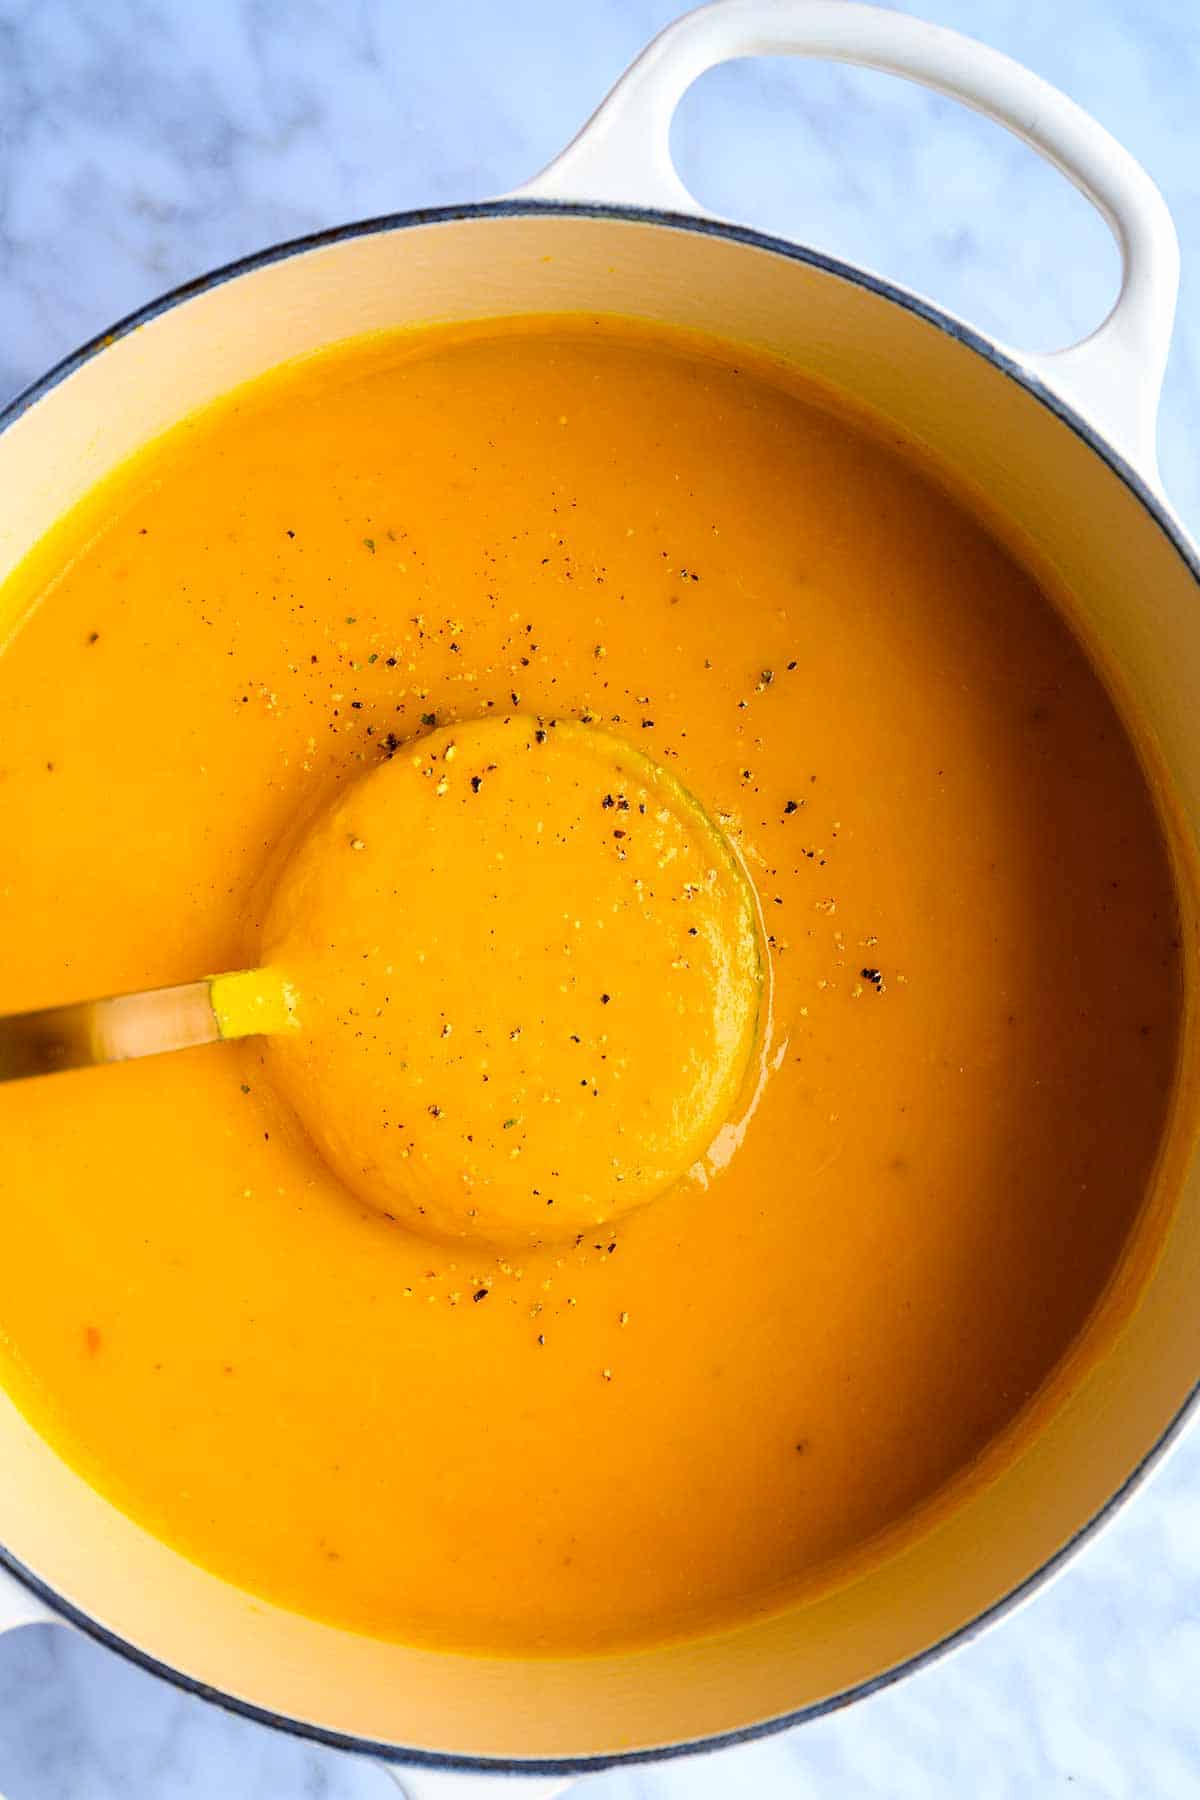 This vegan butternut squash soup is absolutely excellent just the way it is written and depicted, and we firmly believe that everyone at the table,